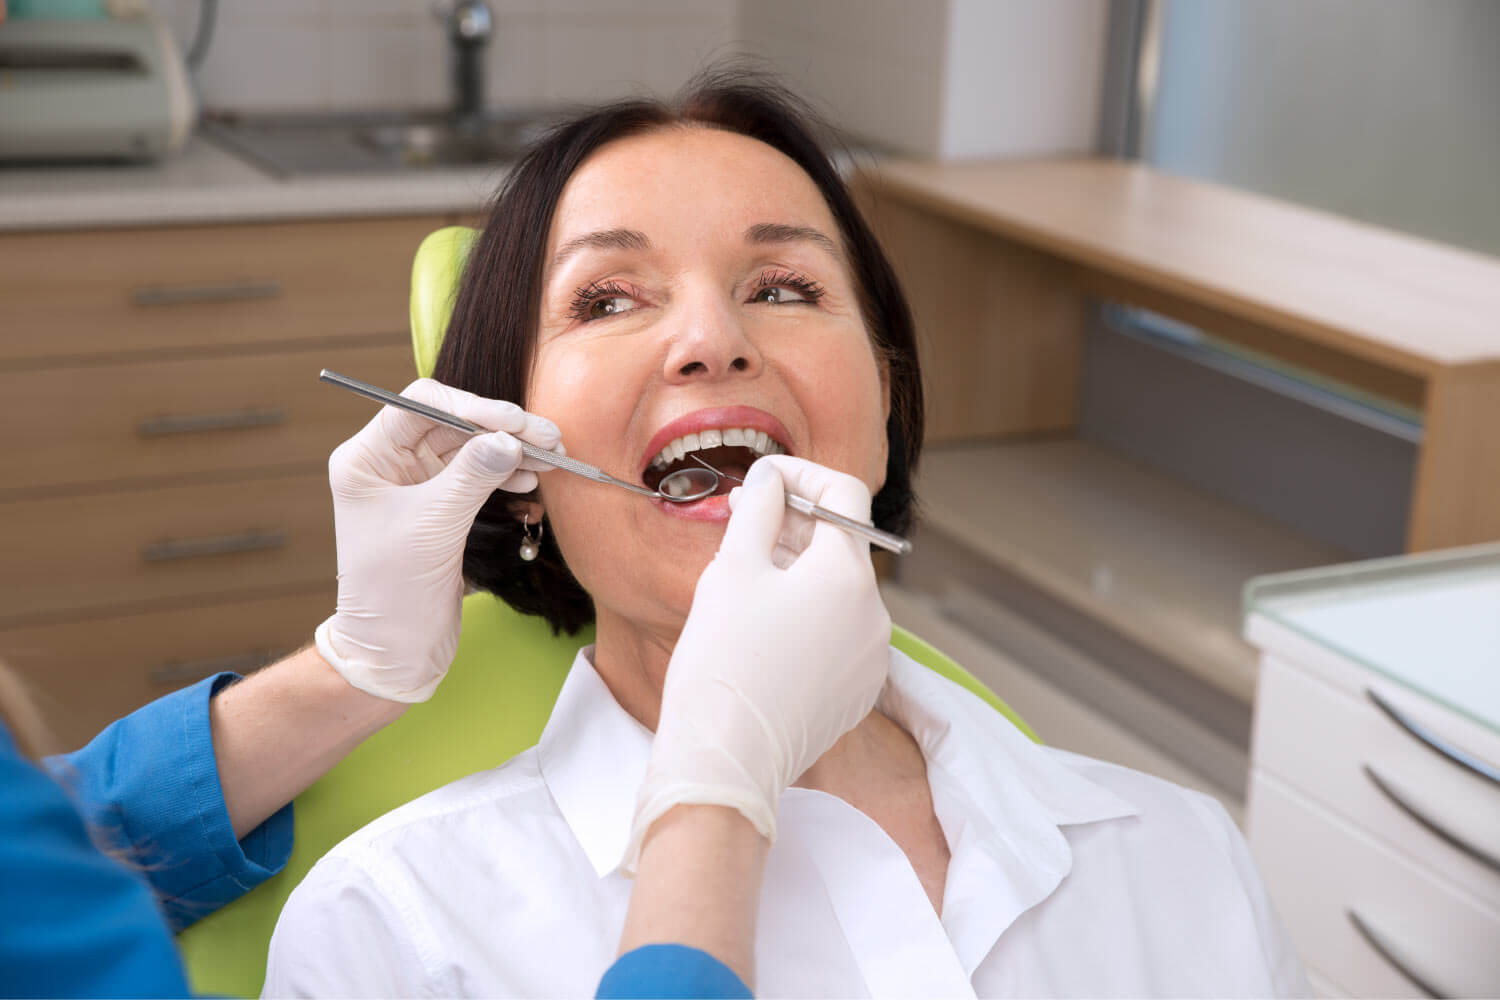 Brunette woman at the dentist gets her teeth cleaned and examined